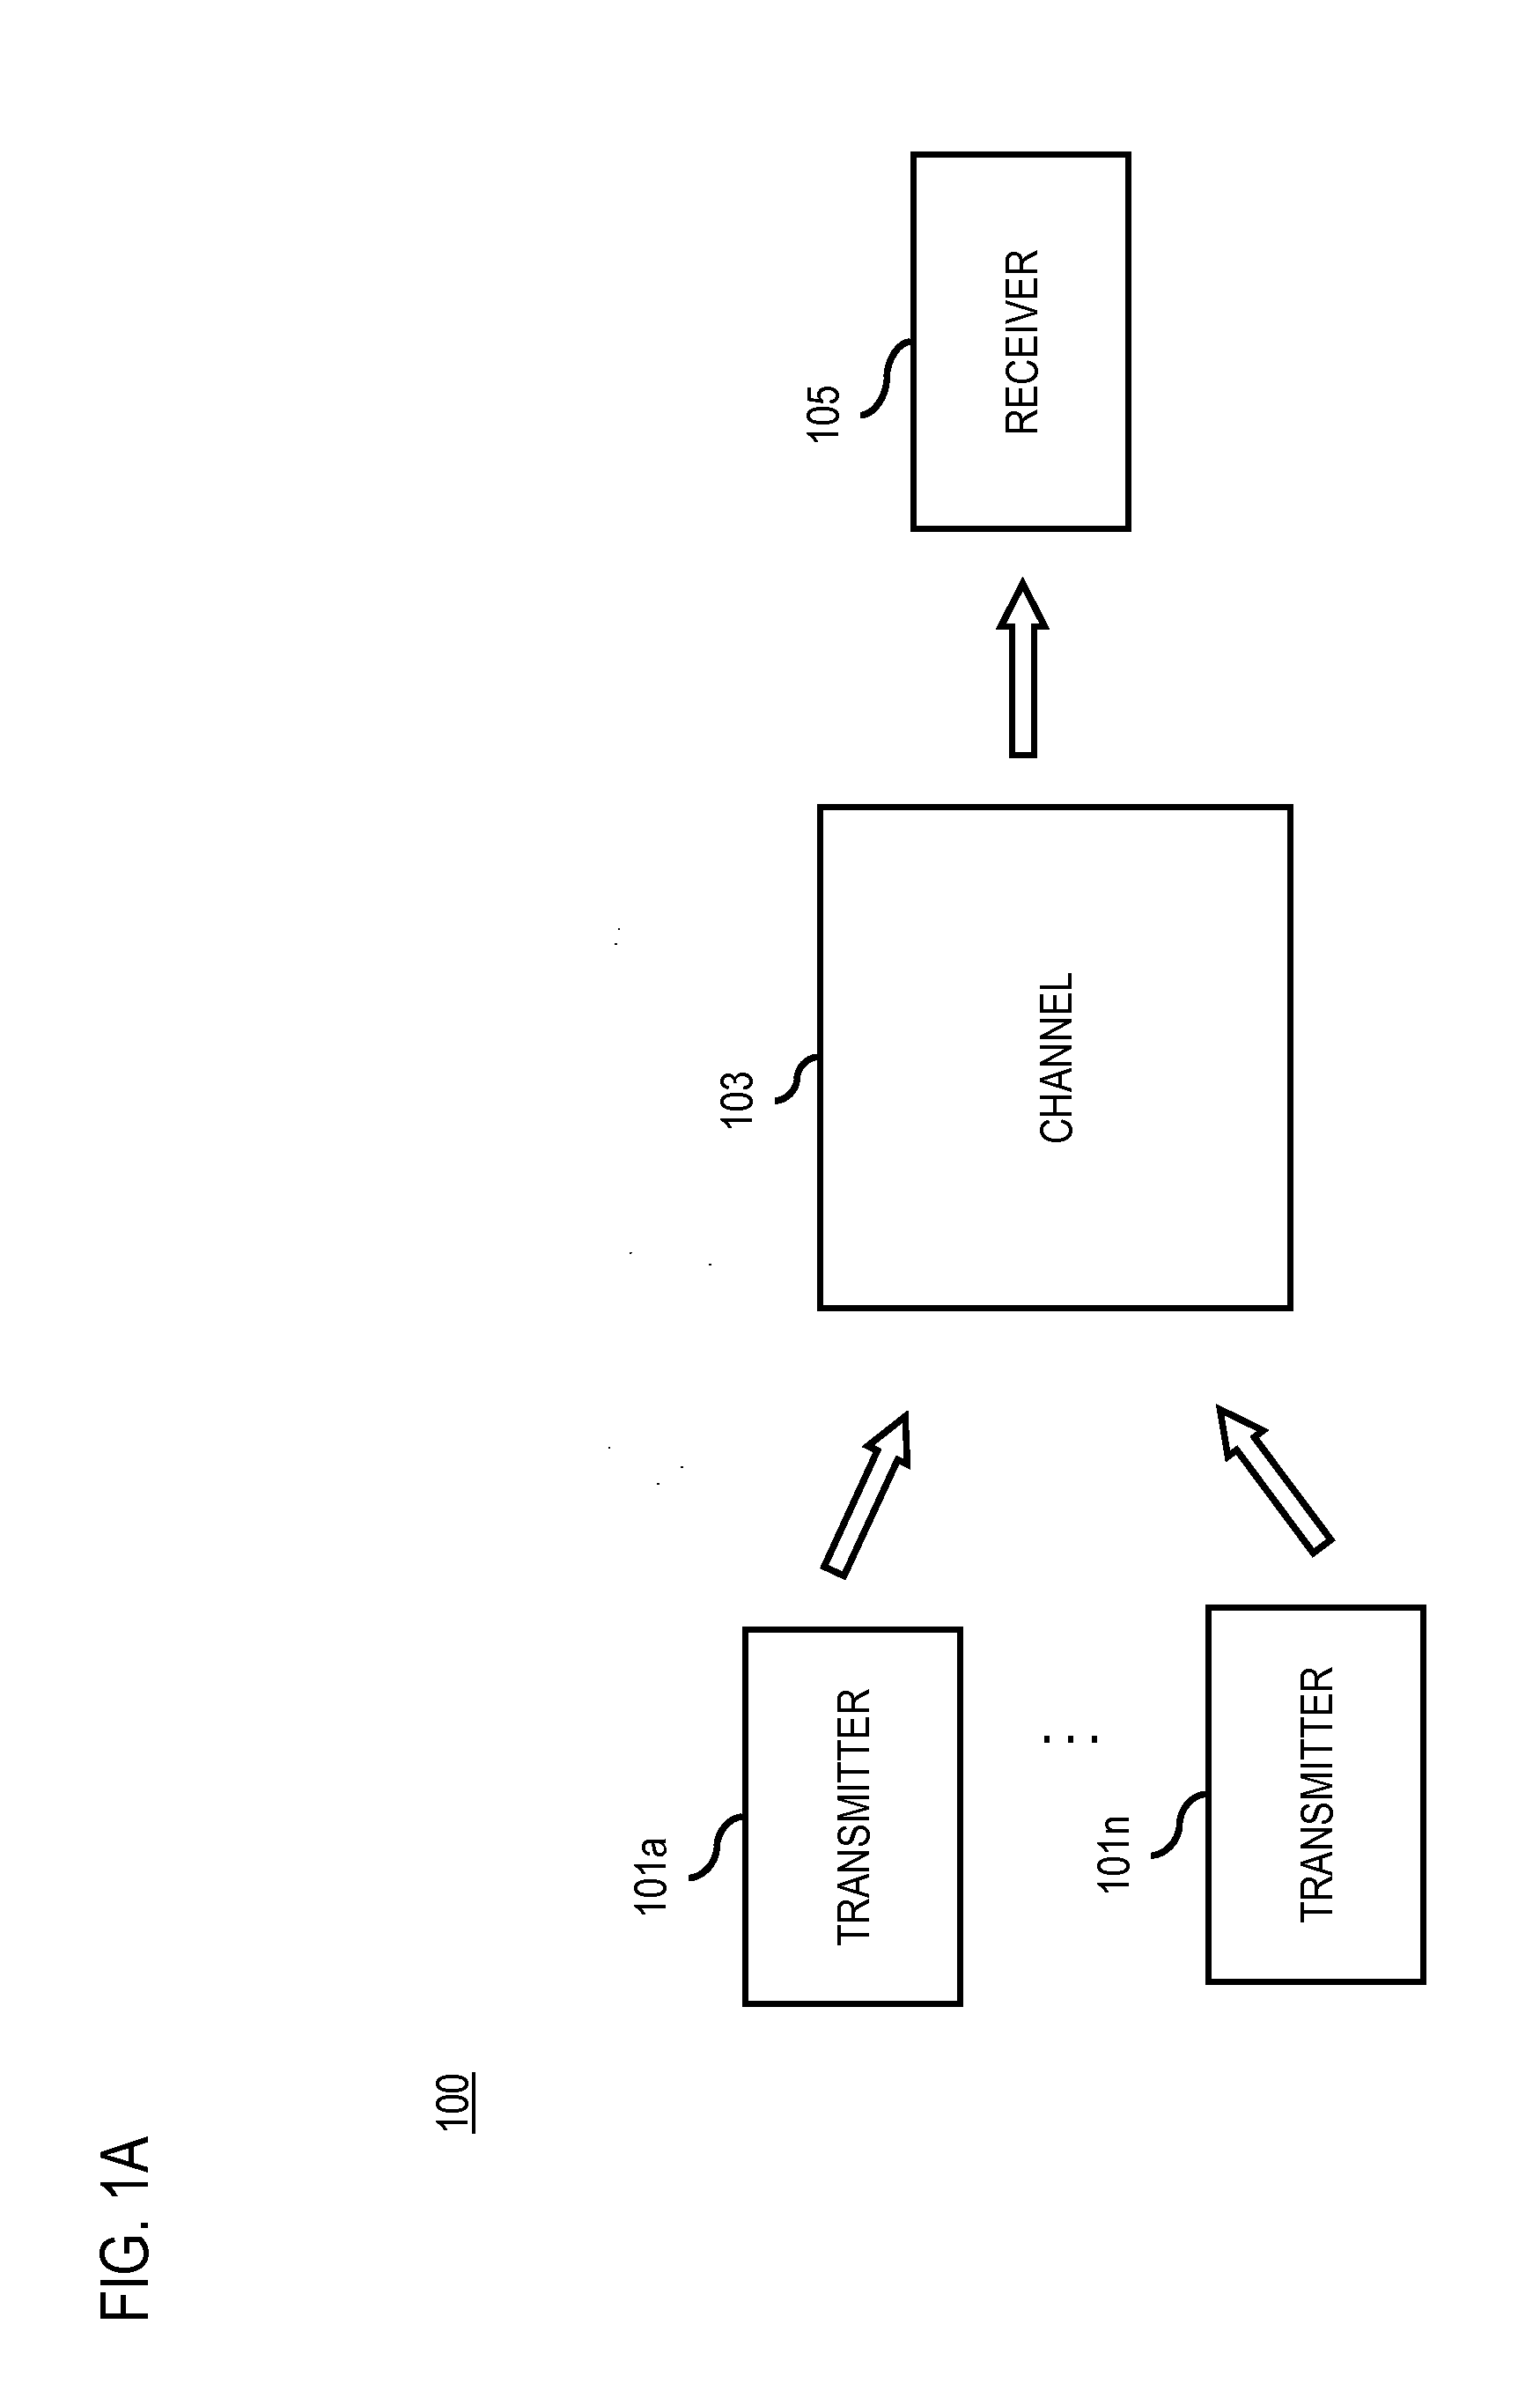 Method and system for providing low density parity check (LDPC) coding for scrambled coded multiple access (SCMA)